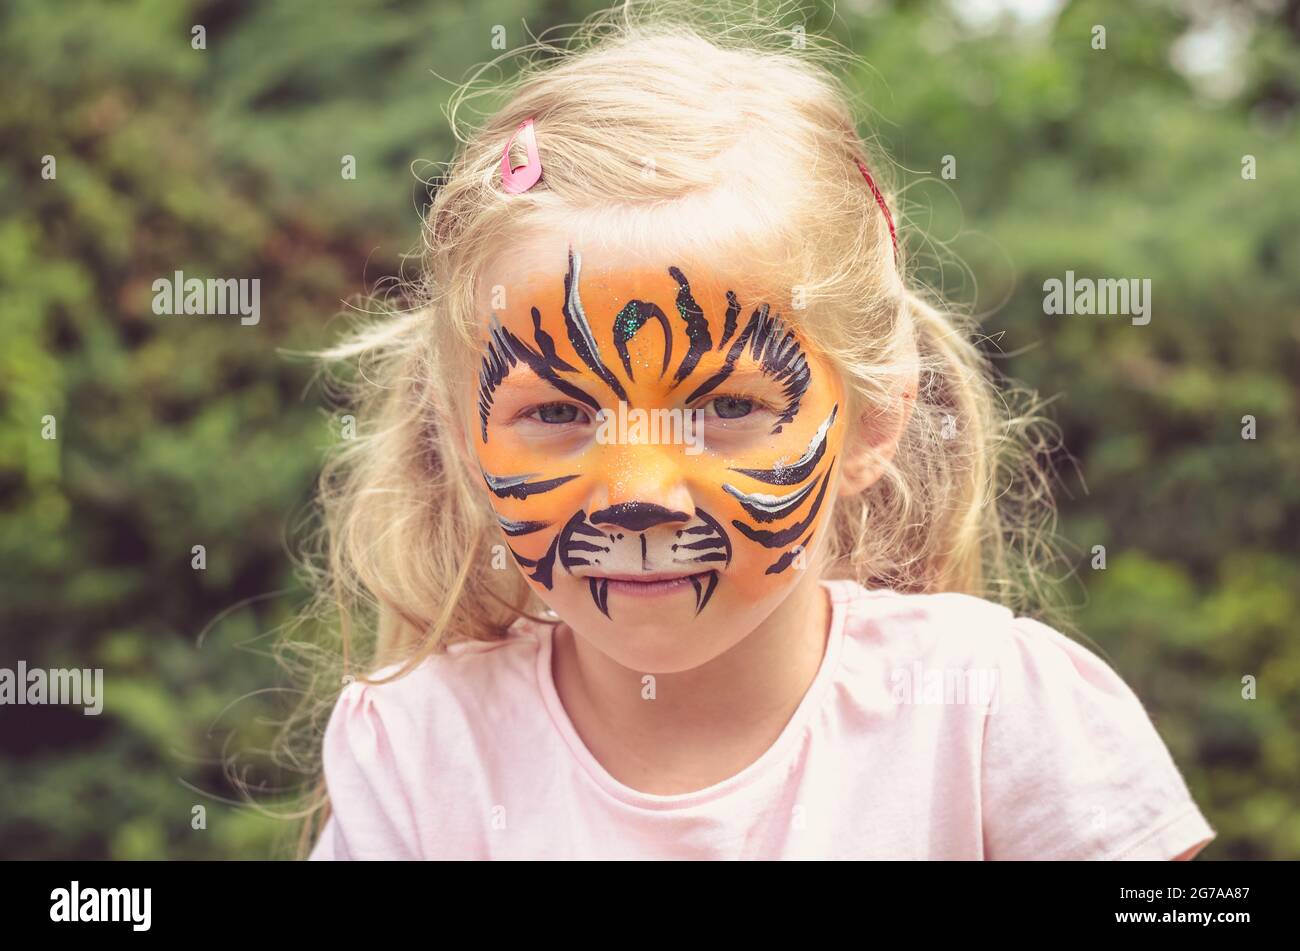 Cute Makeup Little Tiger. Girl Getting Face Painting Outdoors